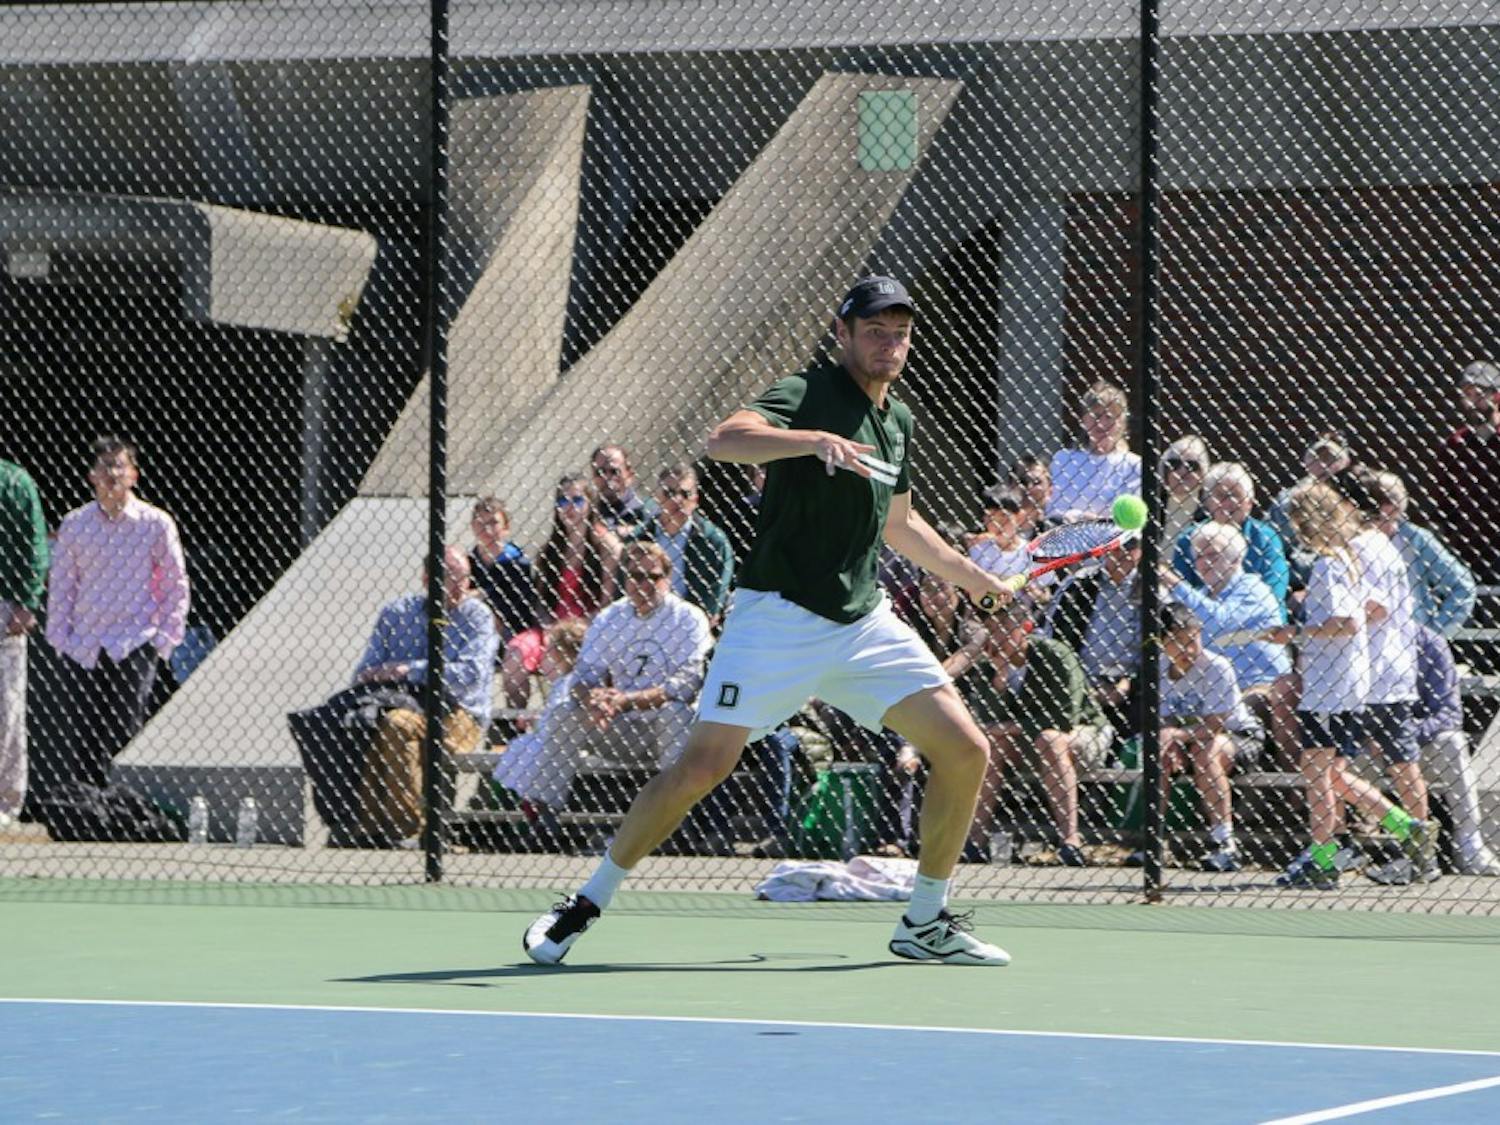 After being named Ivy League Player of the Year, Dovydas Sakinis ’16 qualified for the NCAA singles championship.